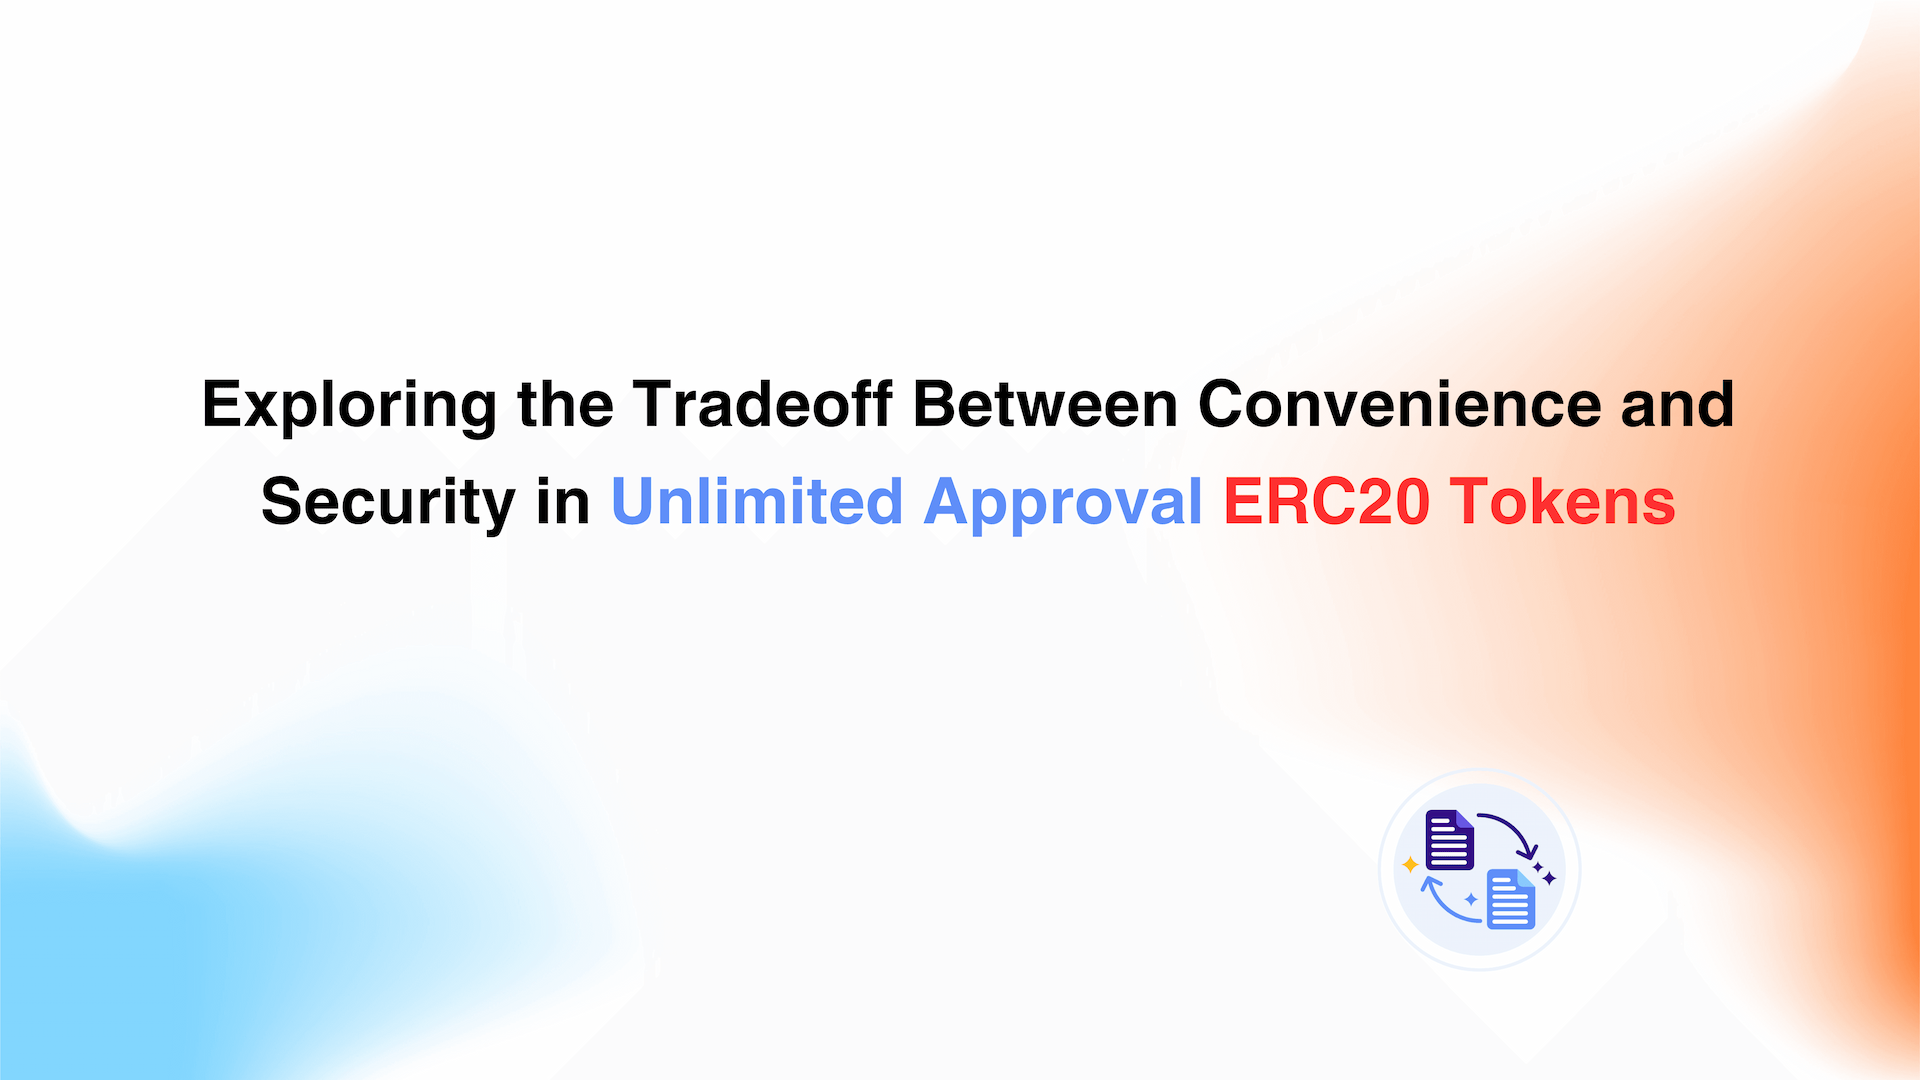 Exploring the Tradeoff Between Convenience and Security in Unlimited Approval ERC20 Tokens